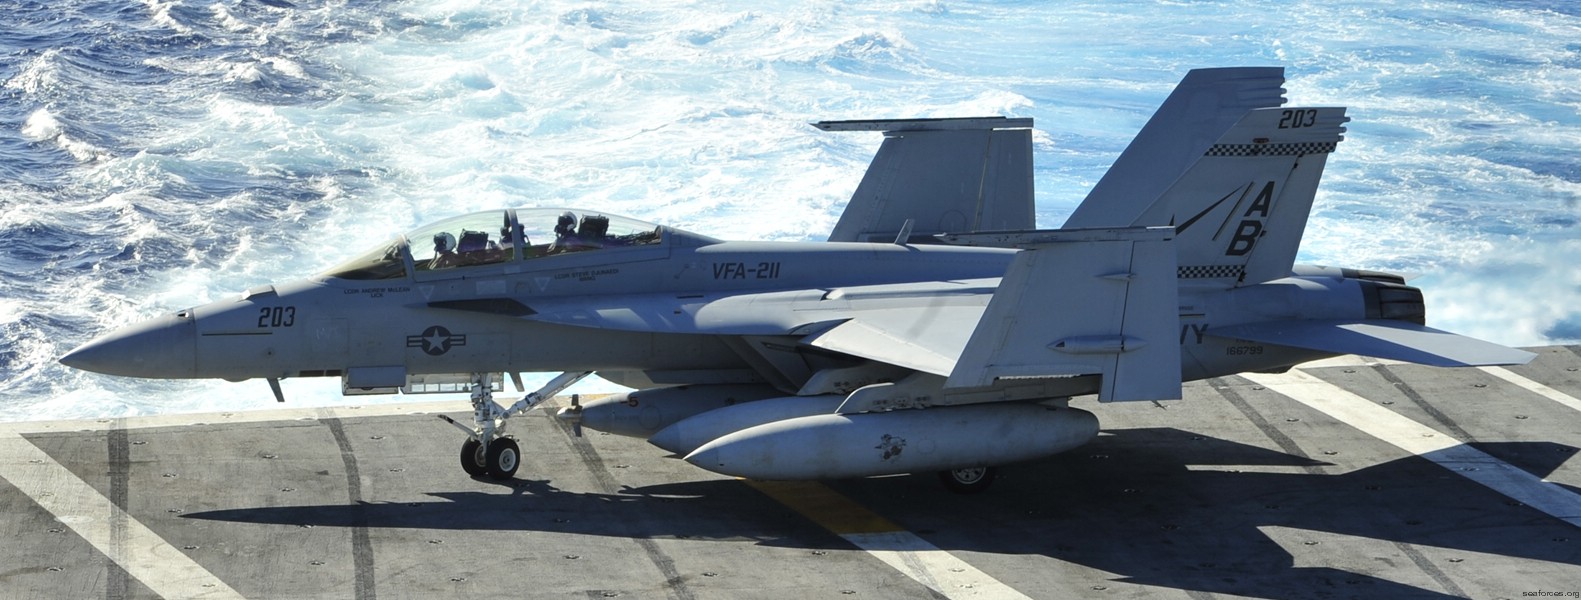 vfa-211 fighting checkmates strike fighter squadron f/a-18f super hornet navy carrier air wing cvw-1 uss enterprise cvn-65 64